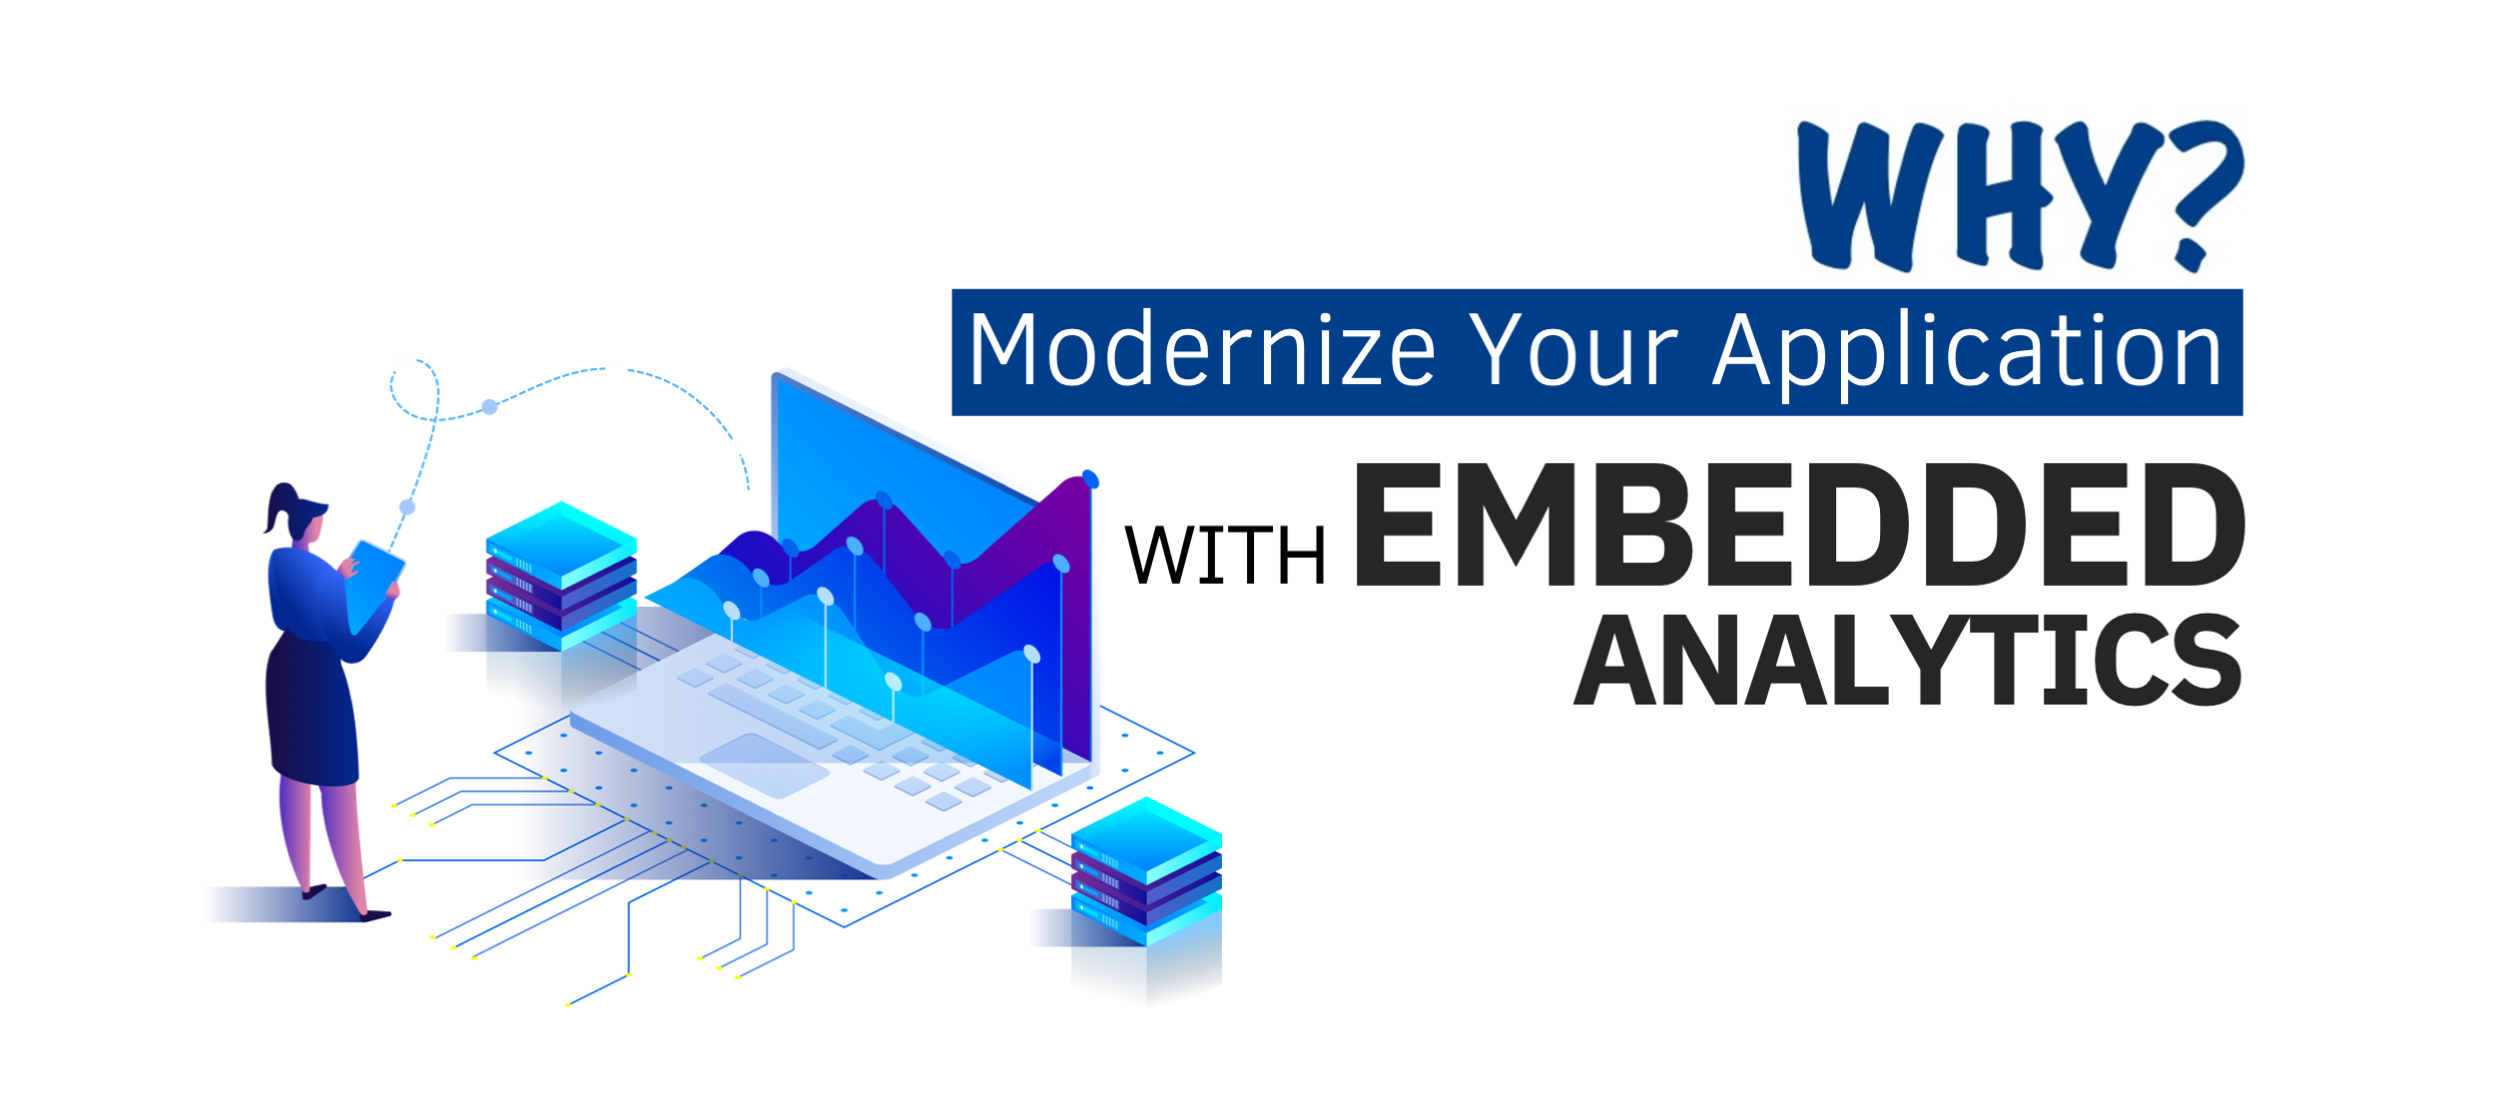 Why Modernize Your Application with Embedded Analytics?